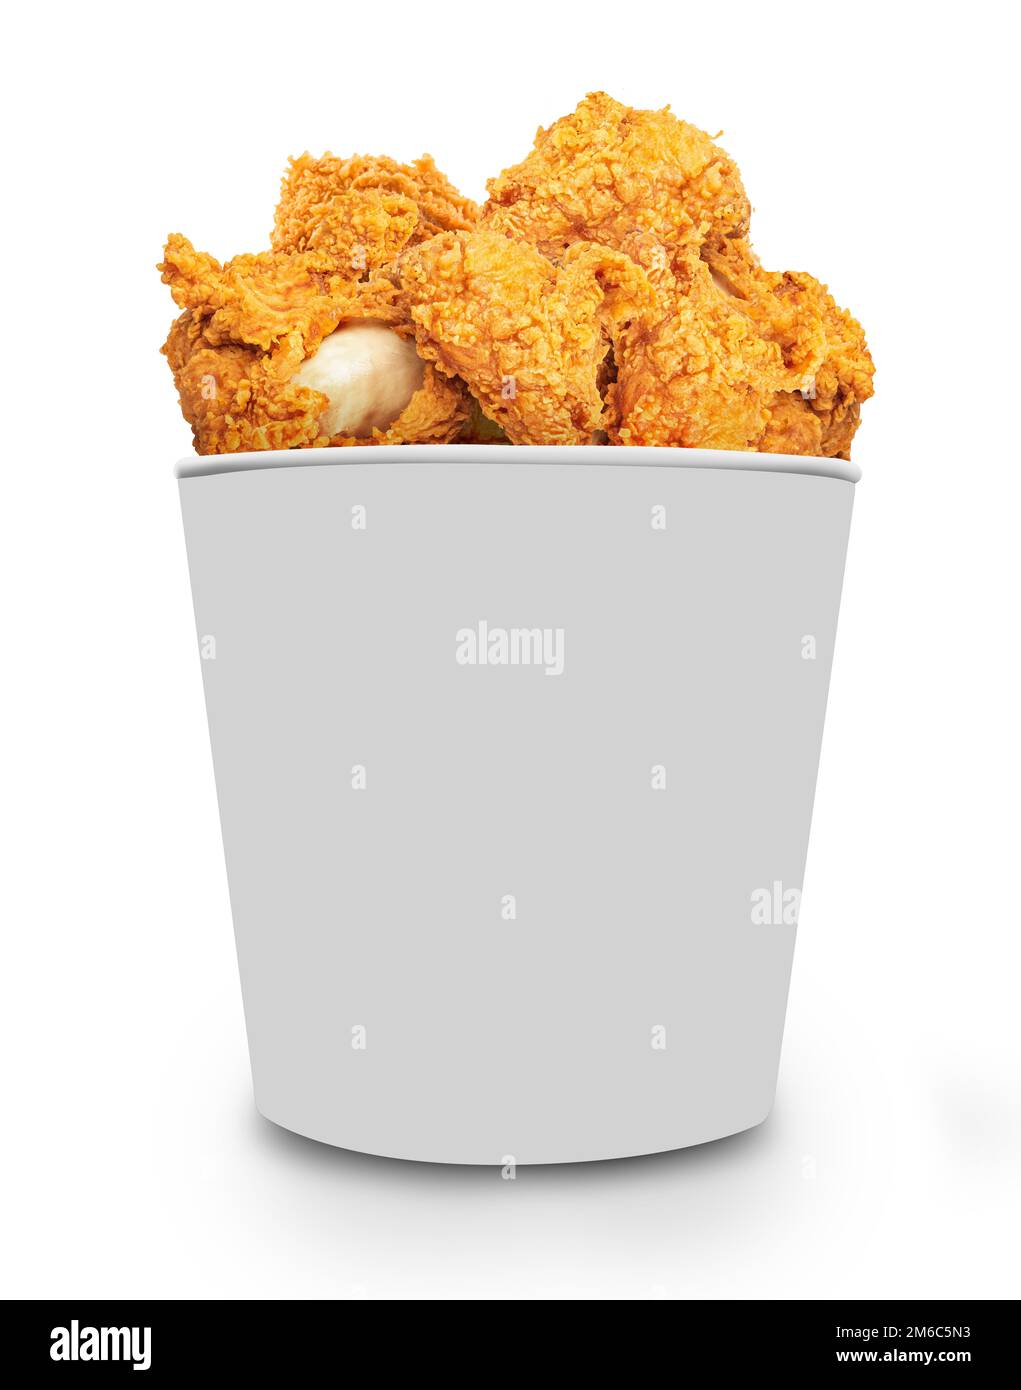 Bucket full of chicken nuggets Stock Photo